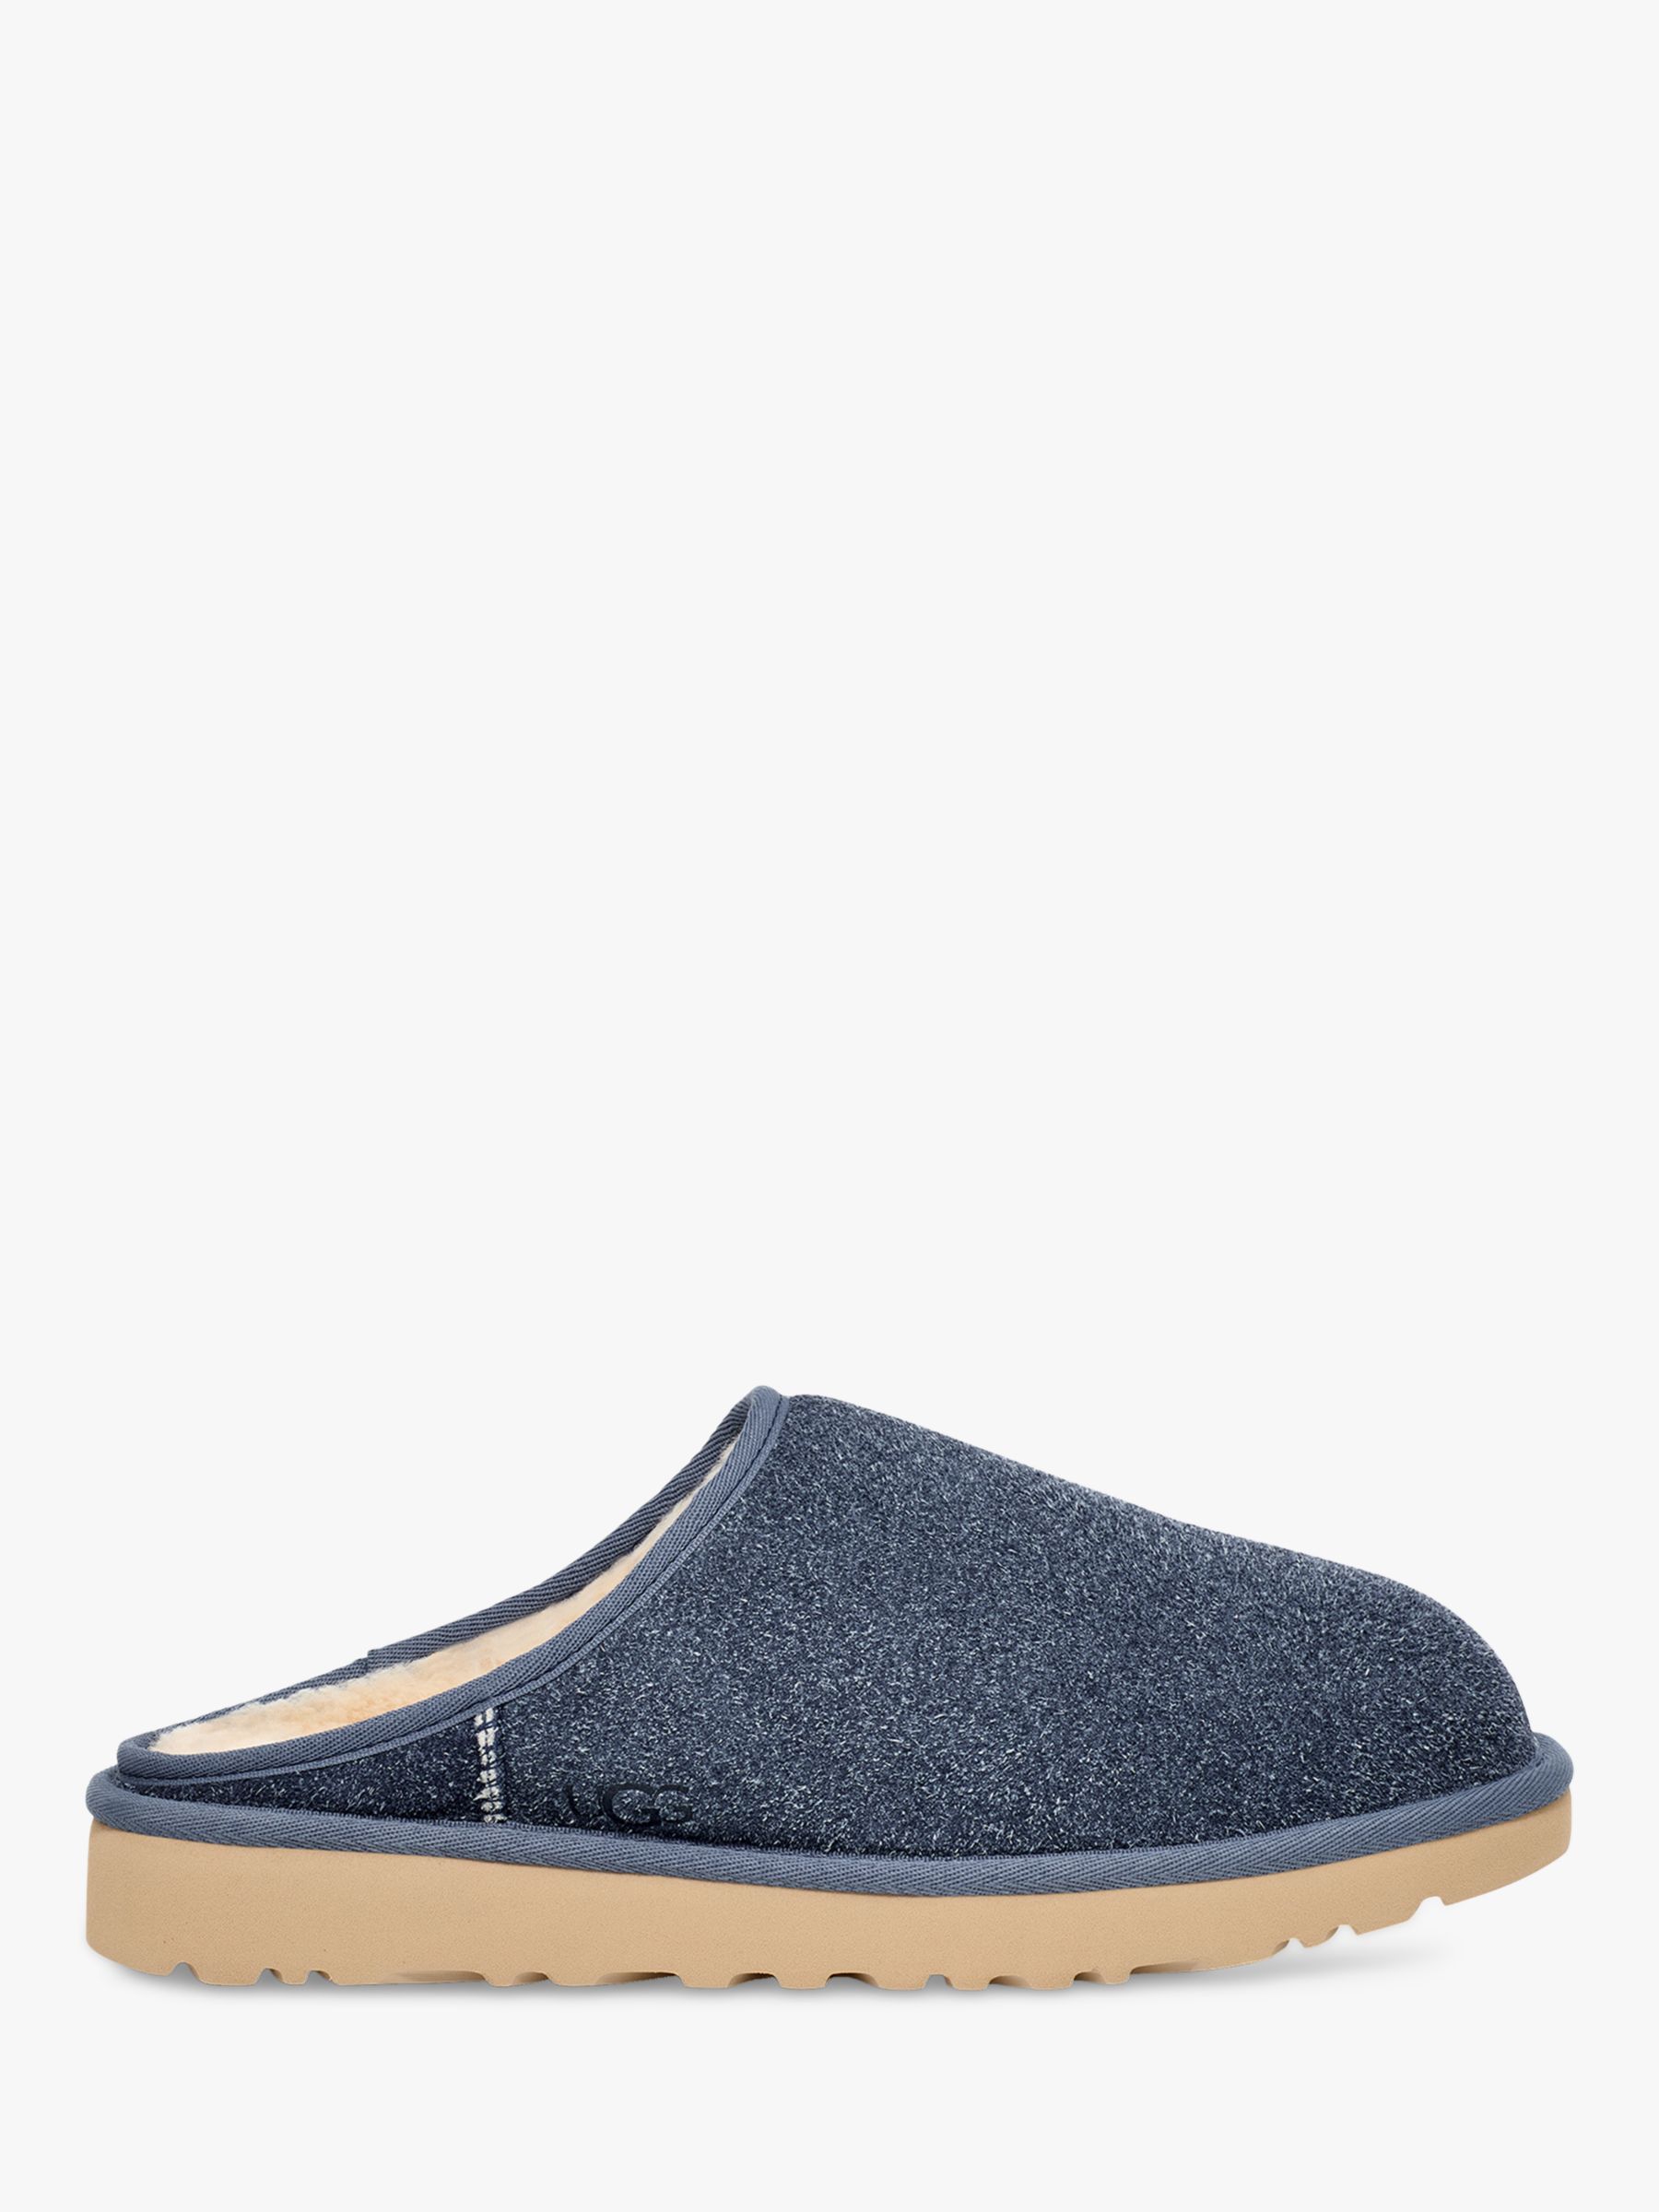 UGG Classic Slip On Shaggy Slippers, Blue at John Lewis & Partners